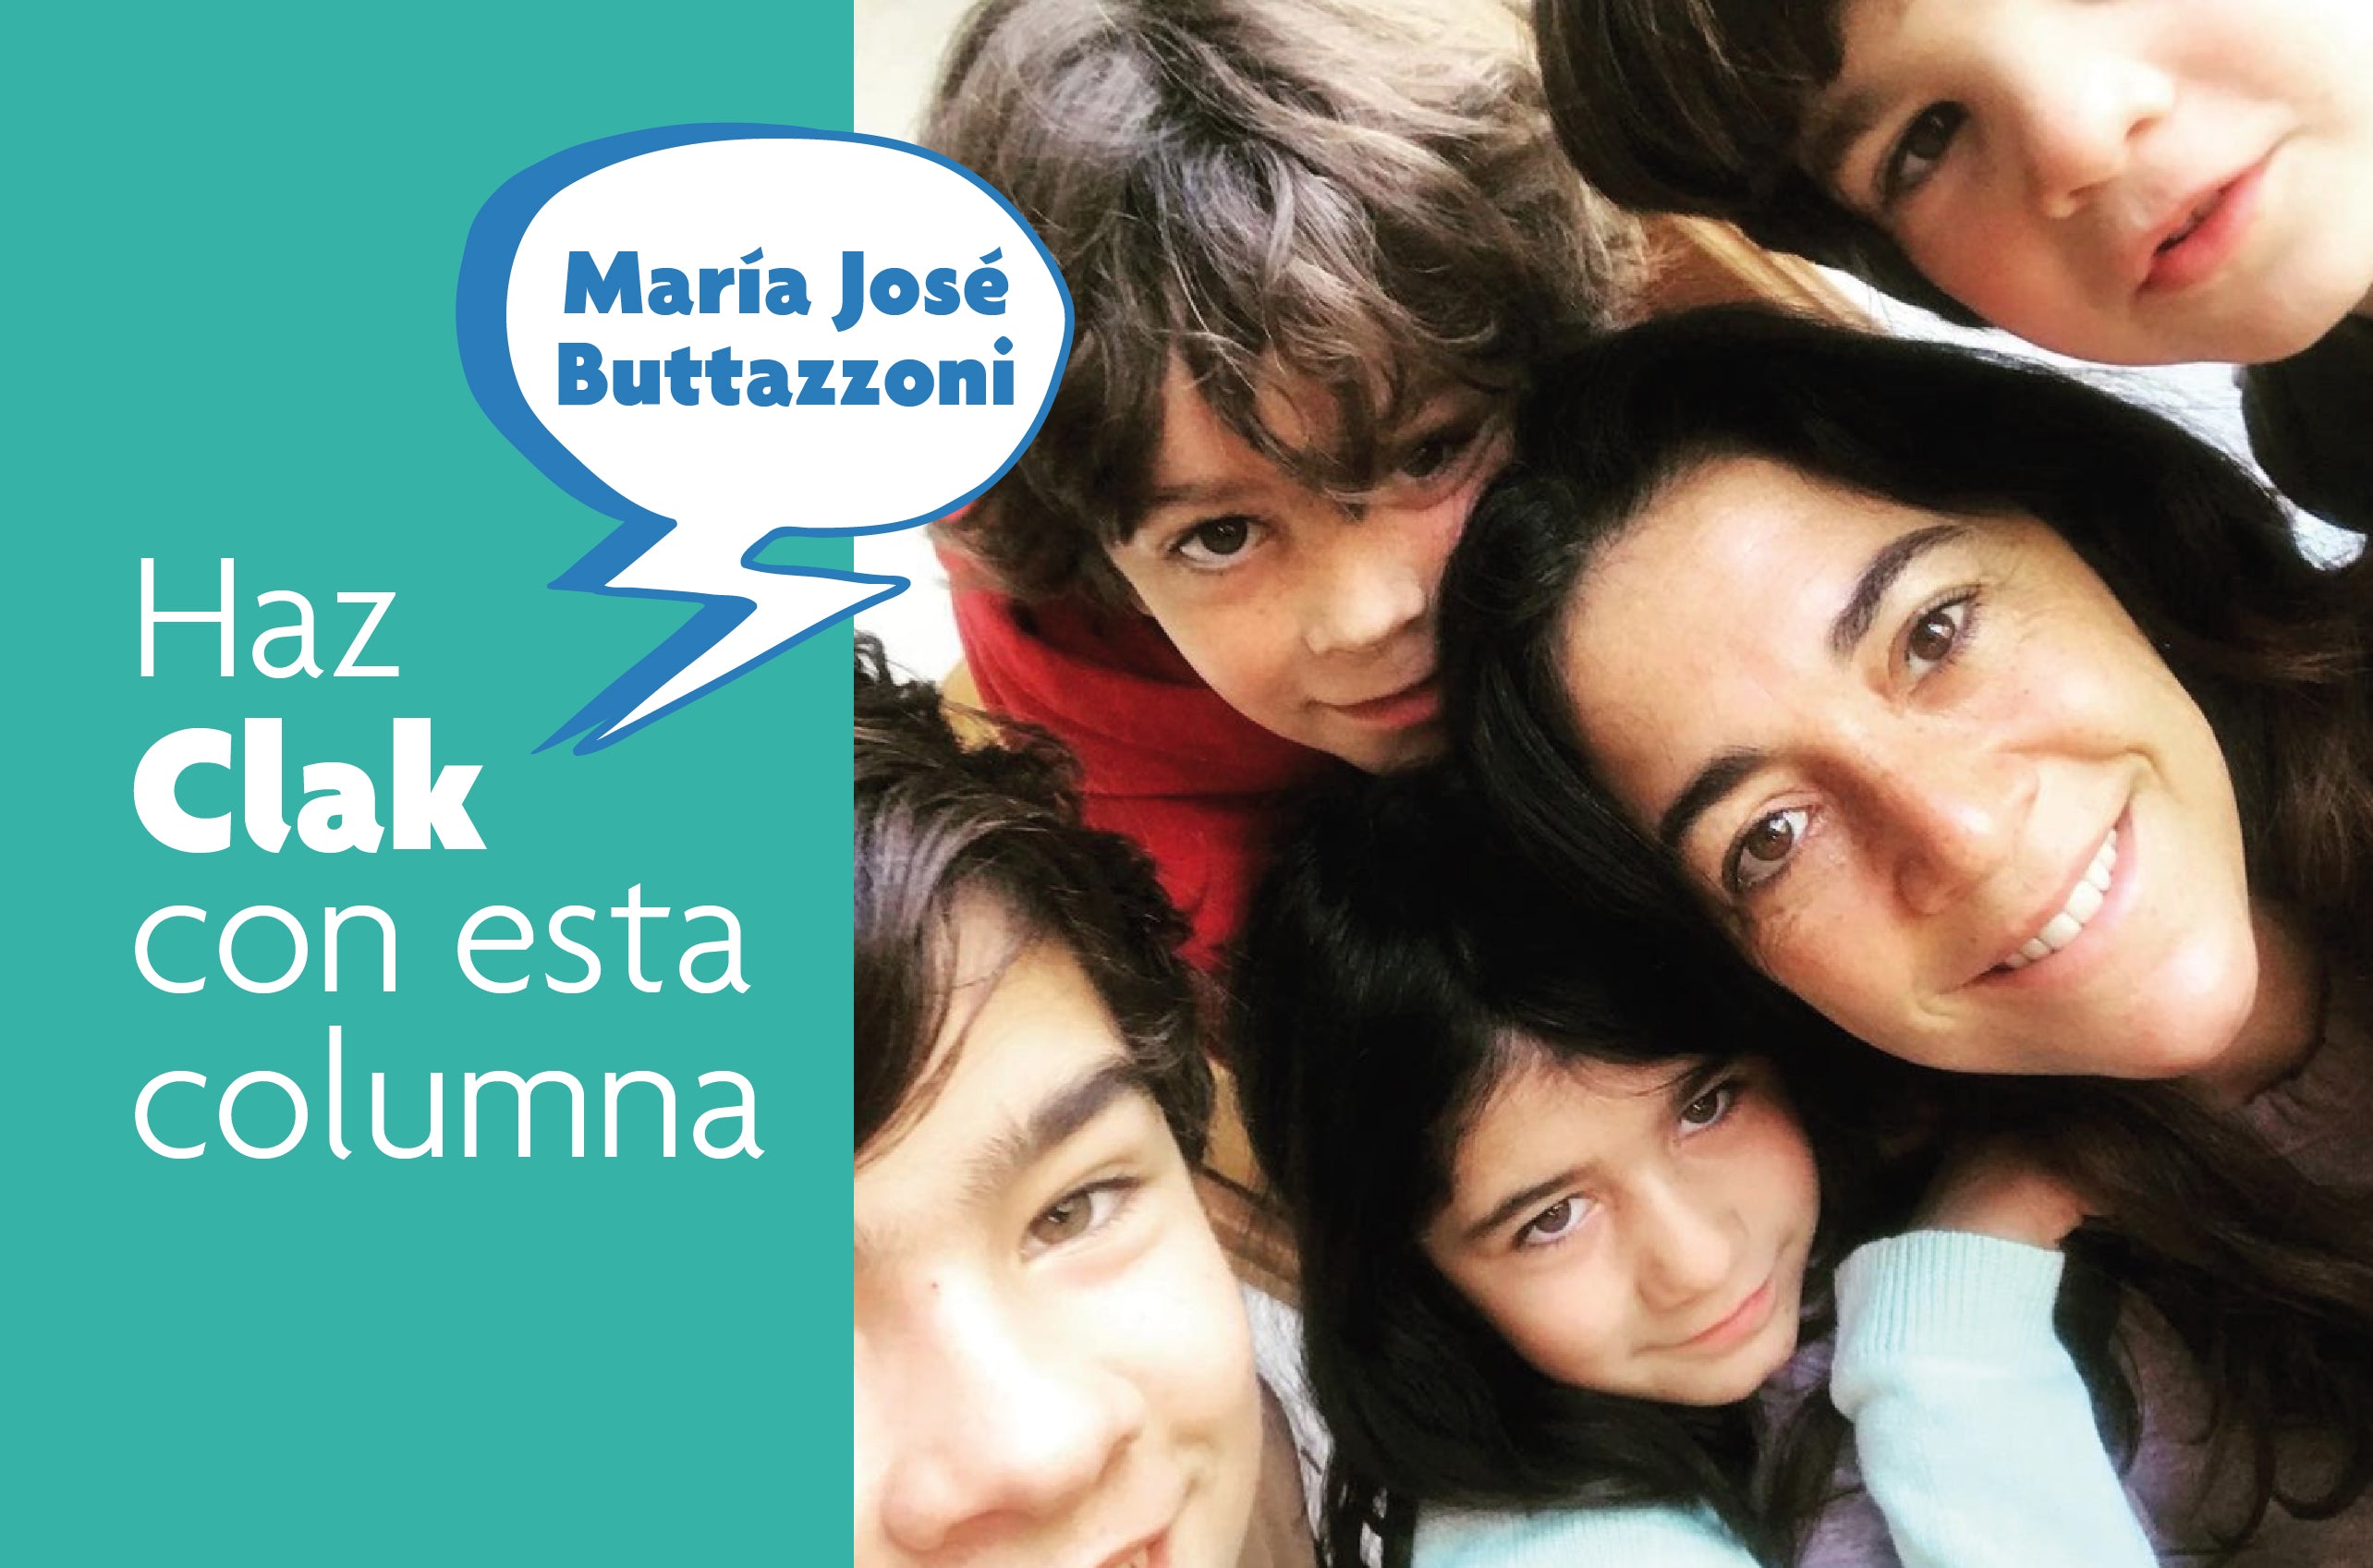 María José Buttazzoni: Family Mental Health and the importance of surrounding ourselves with loved ones